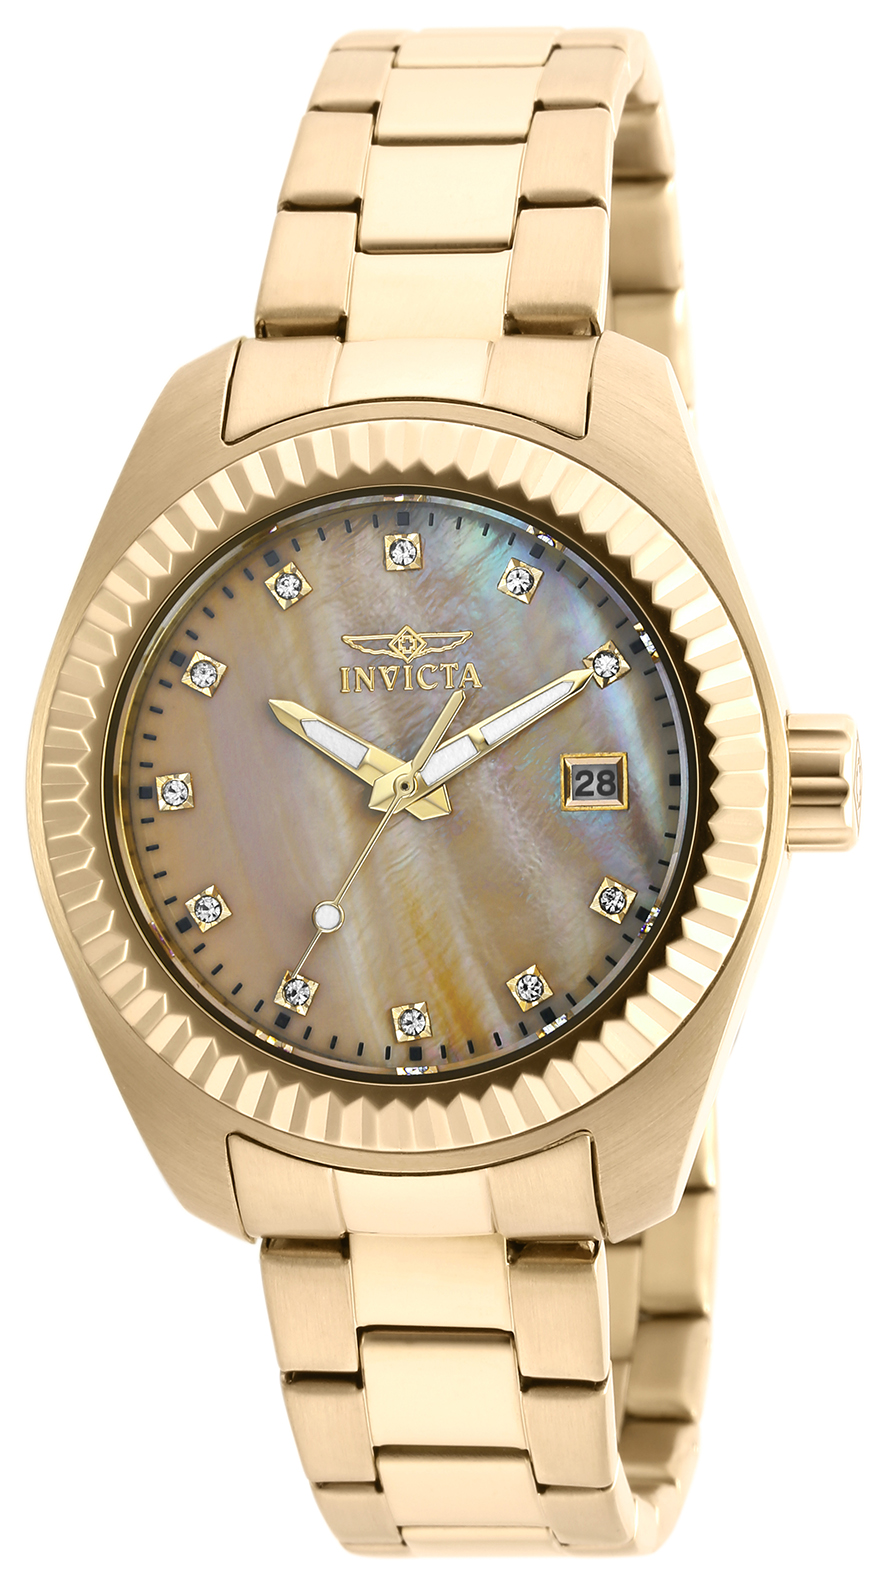 Invicta Specialty Women's Watch - 38mm, Gold (20352)